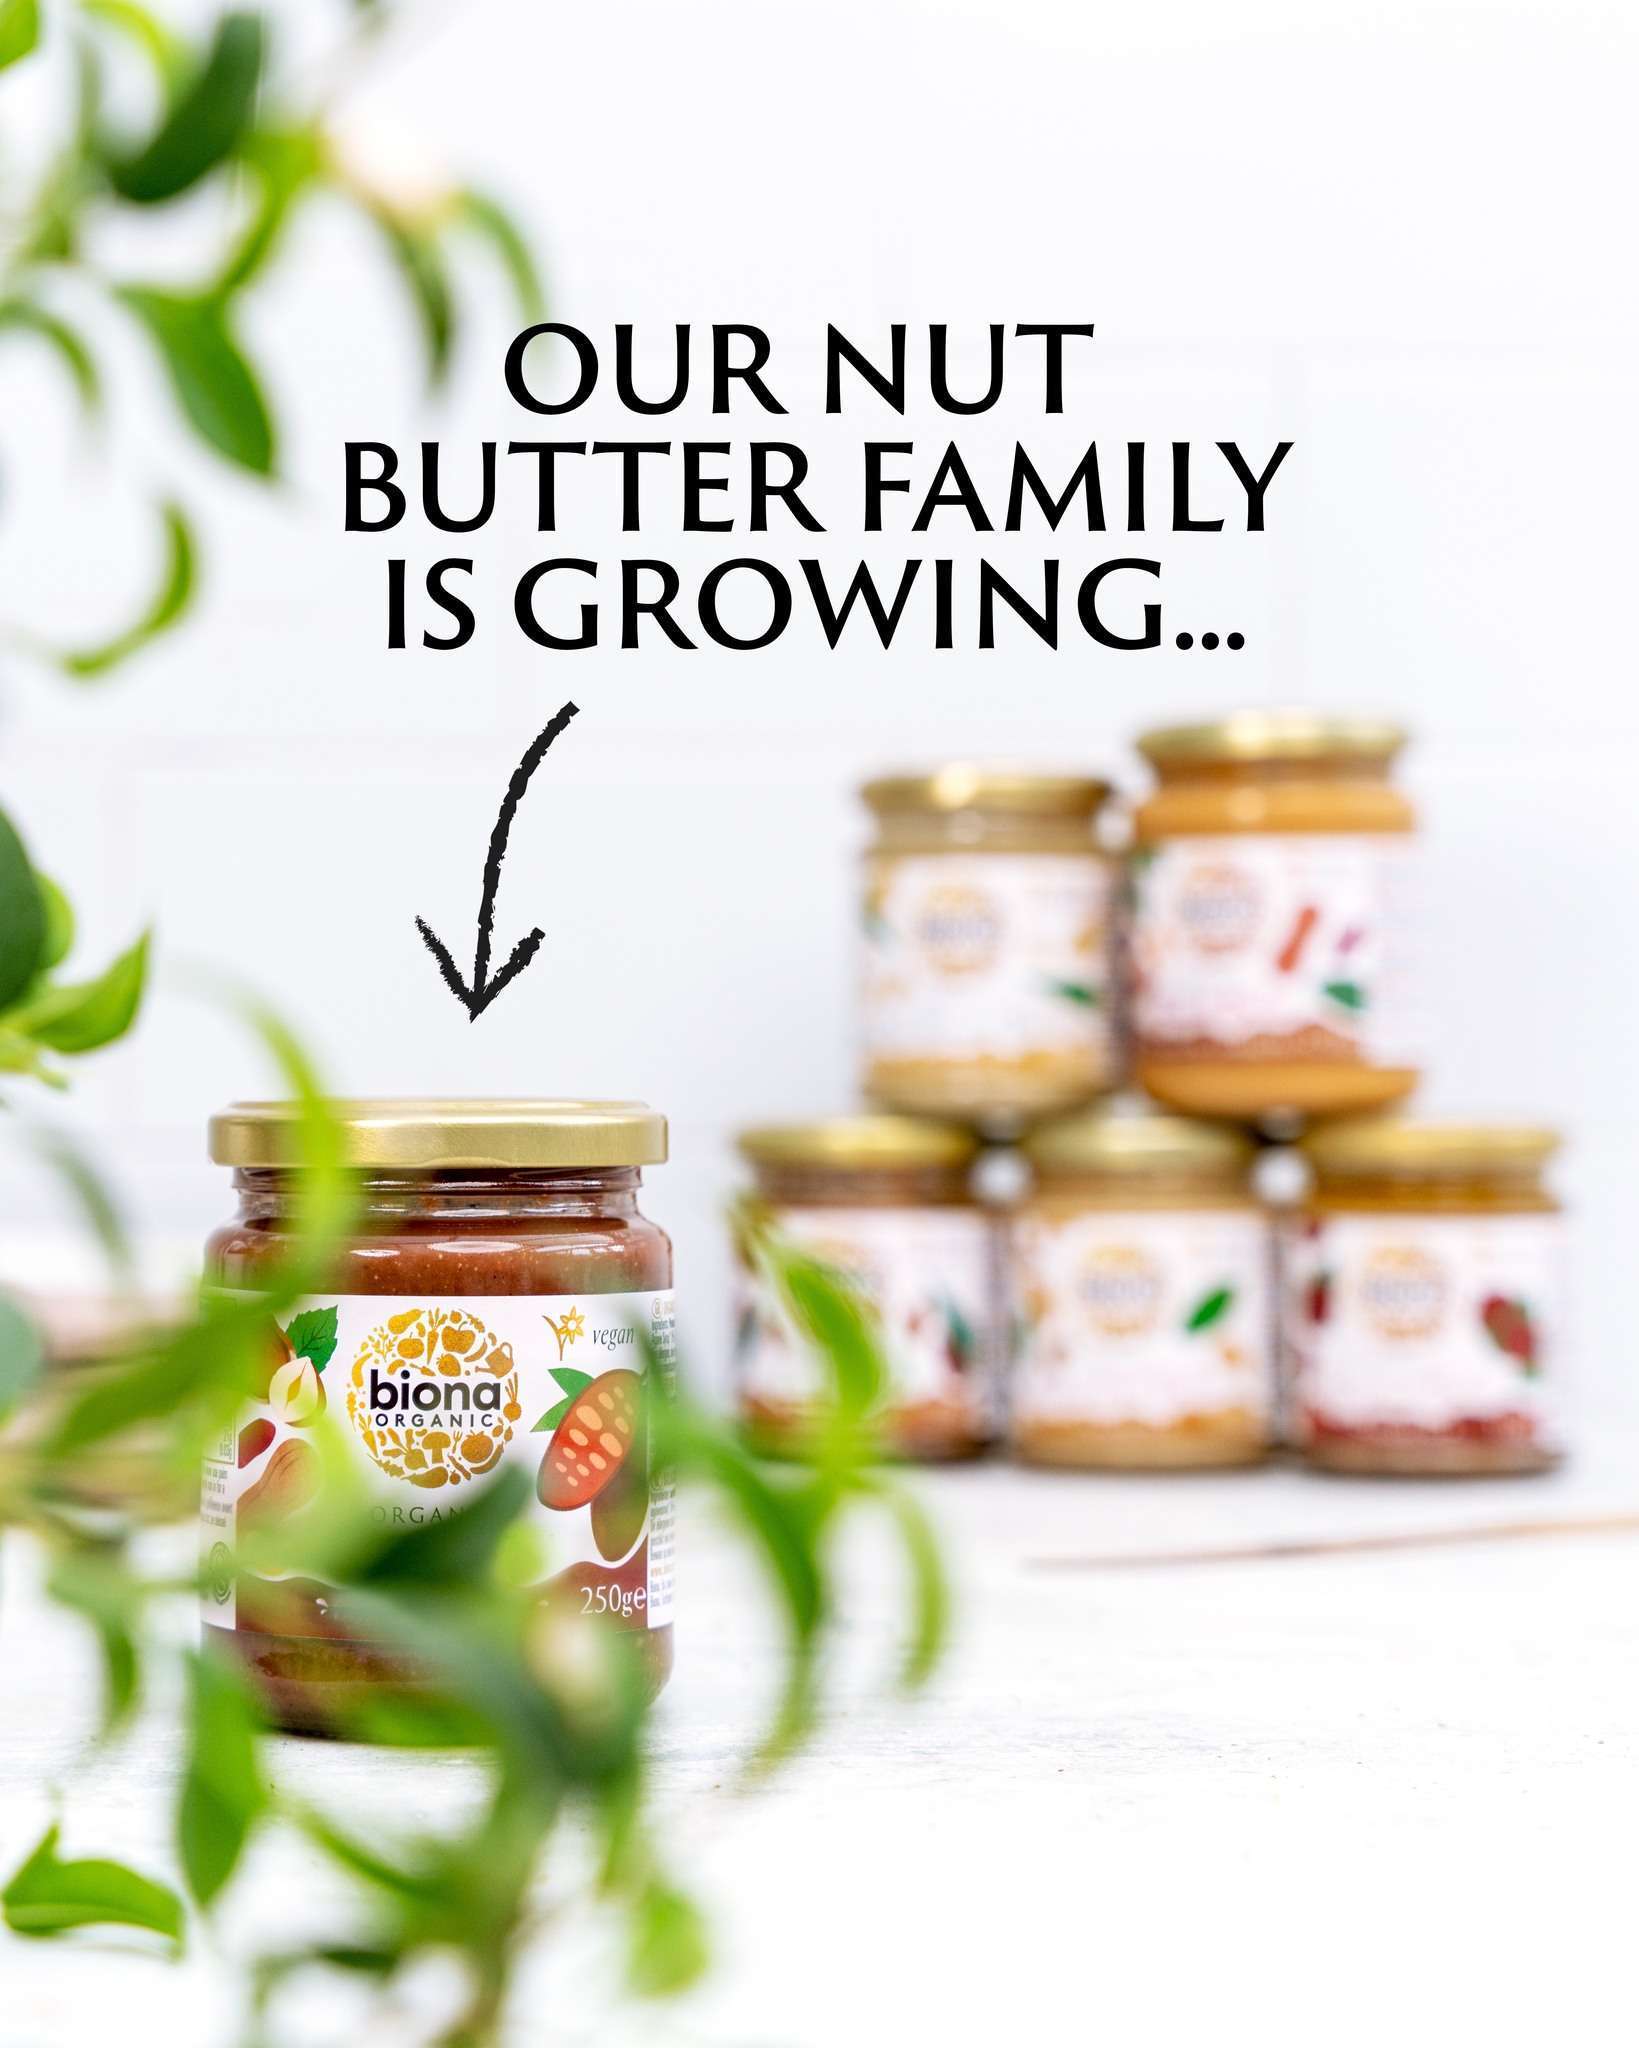 Organic Nut Butter - A Pure Natural Protein Source for Health